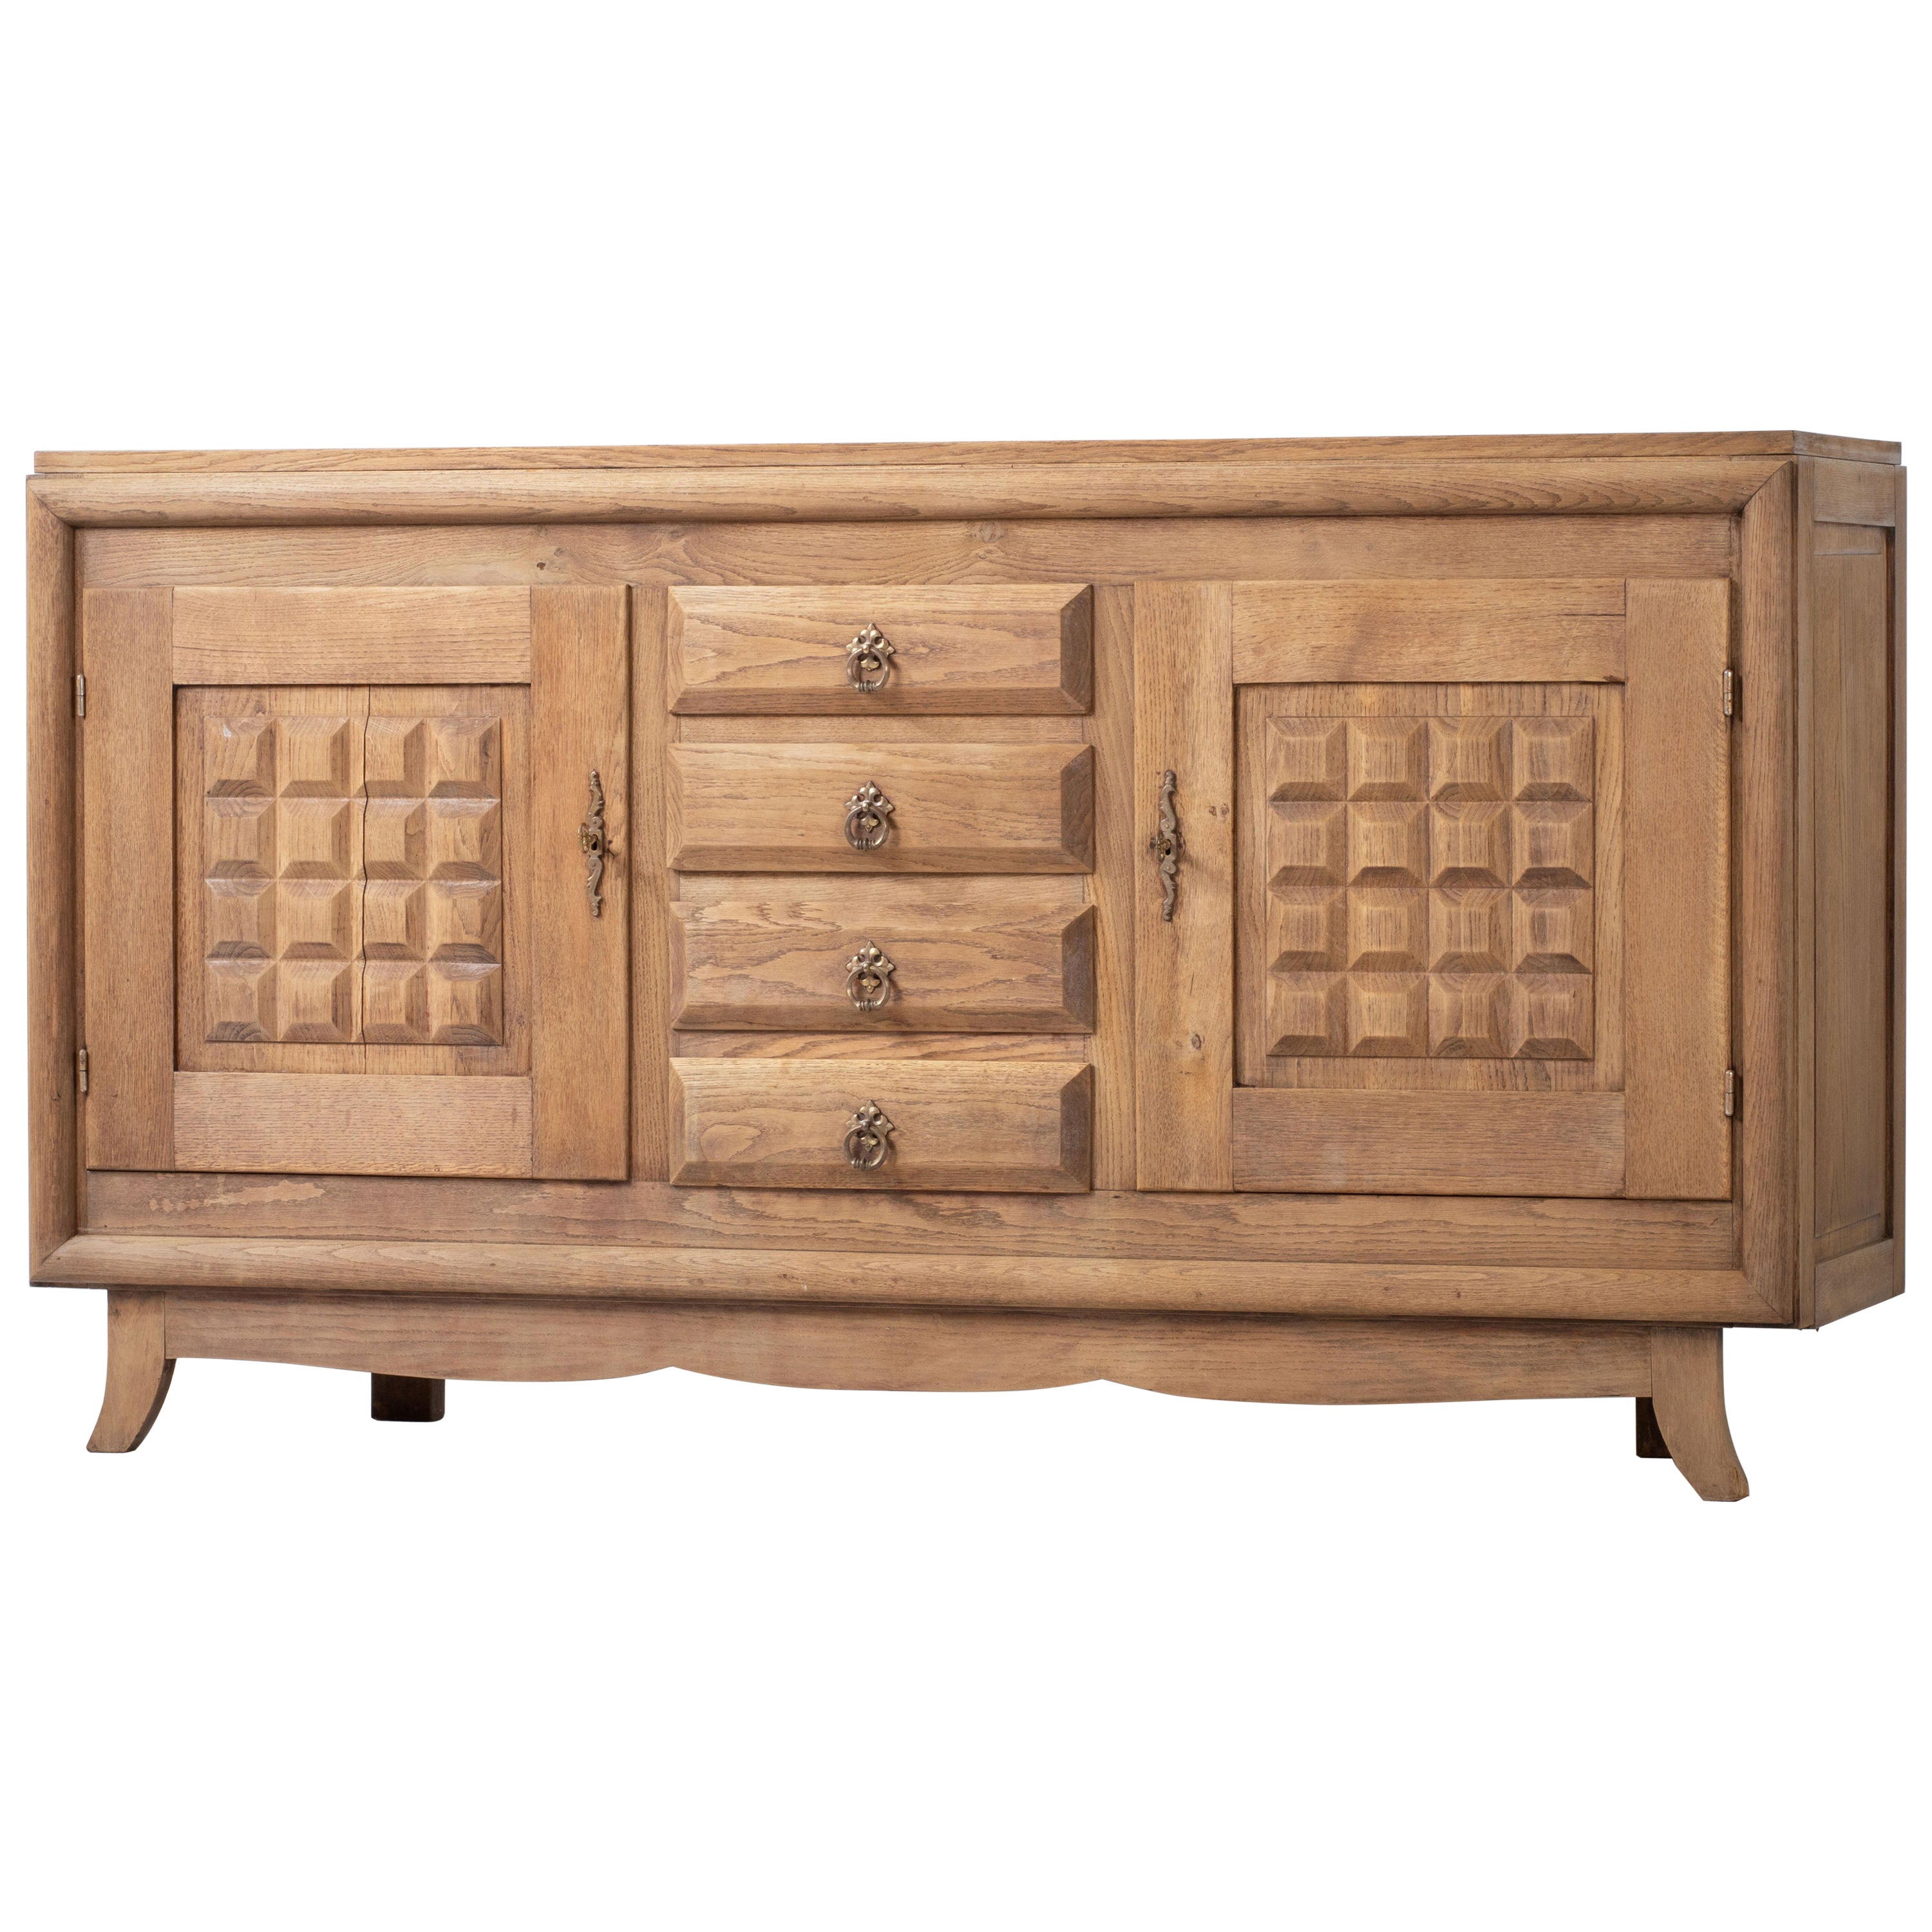 Raw Solid Oak Cabinet with Graphic Details, France, 1940s For Sale